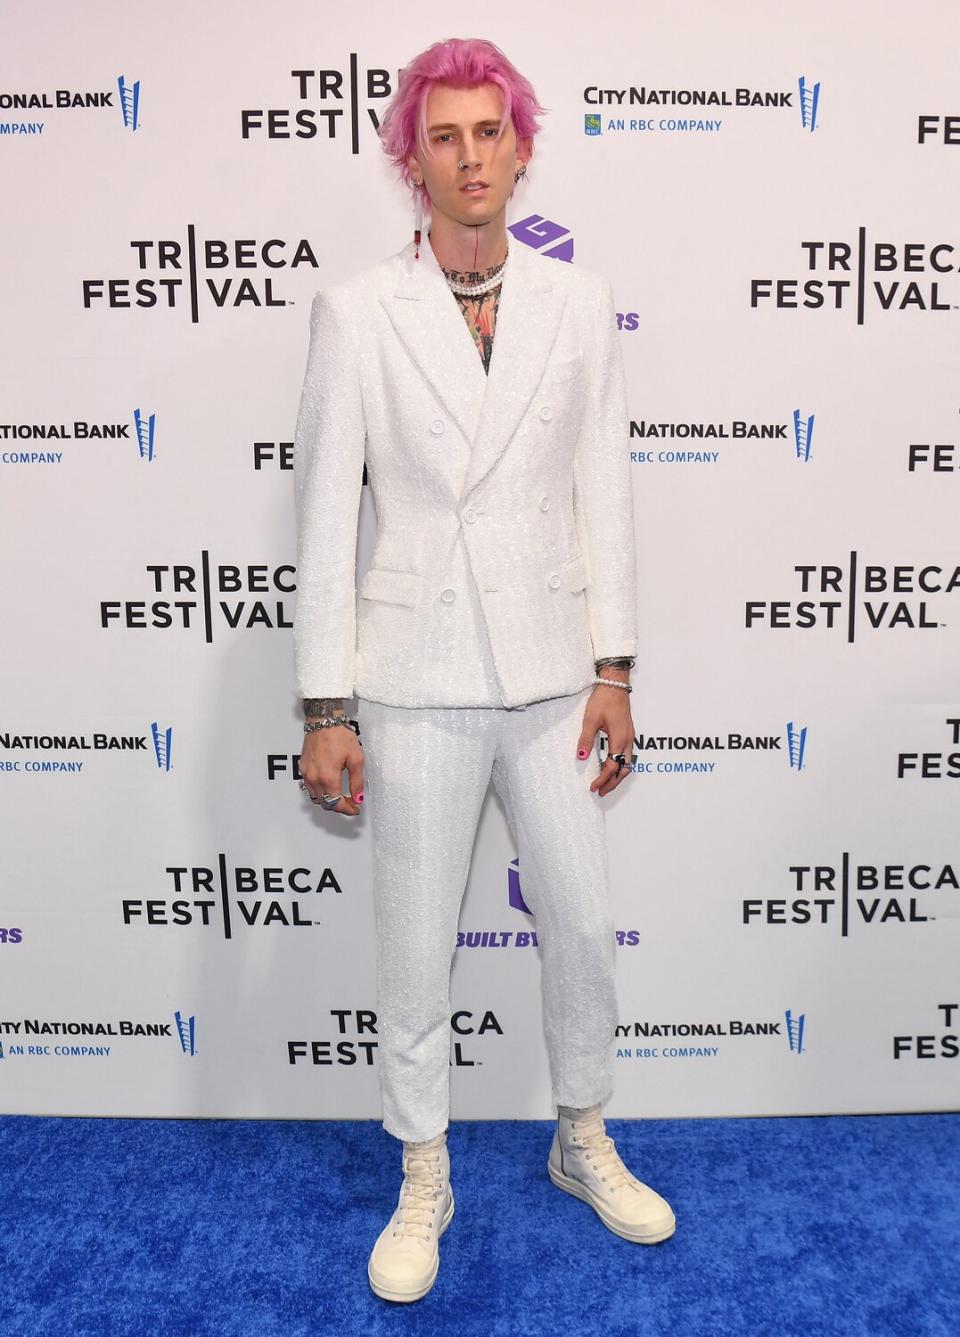 Colson Baker, known professionally as Machine Gun Kelly, attends the "Taurus" premiere during the Tribeca Festival at Beacon Theatre on June 9, 2022 in New York City.